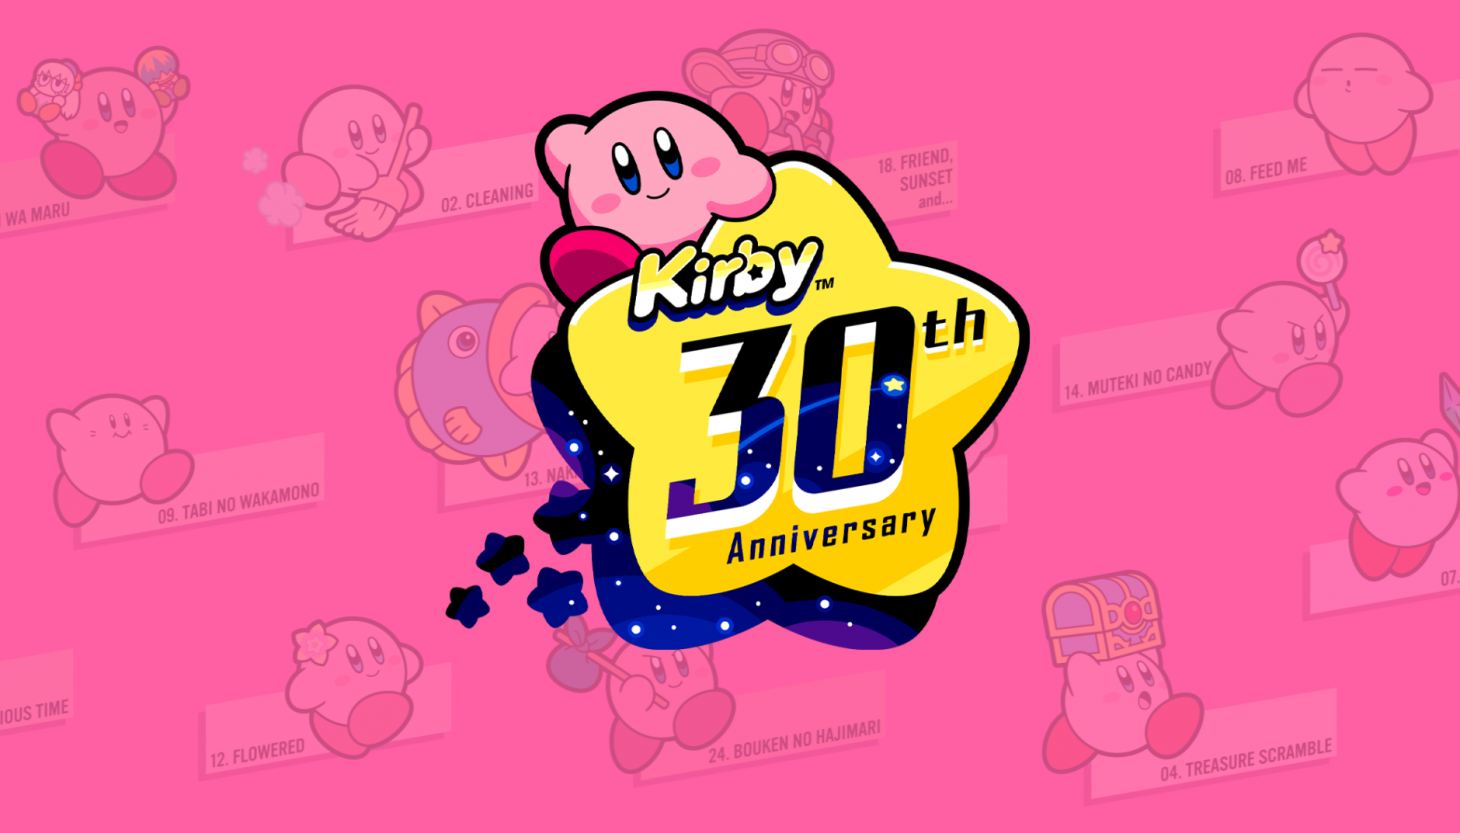 Cute Kirby Wallpaper Discover more Games, Kirby wallpaper. https